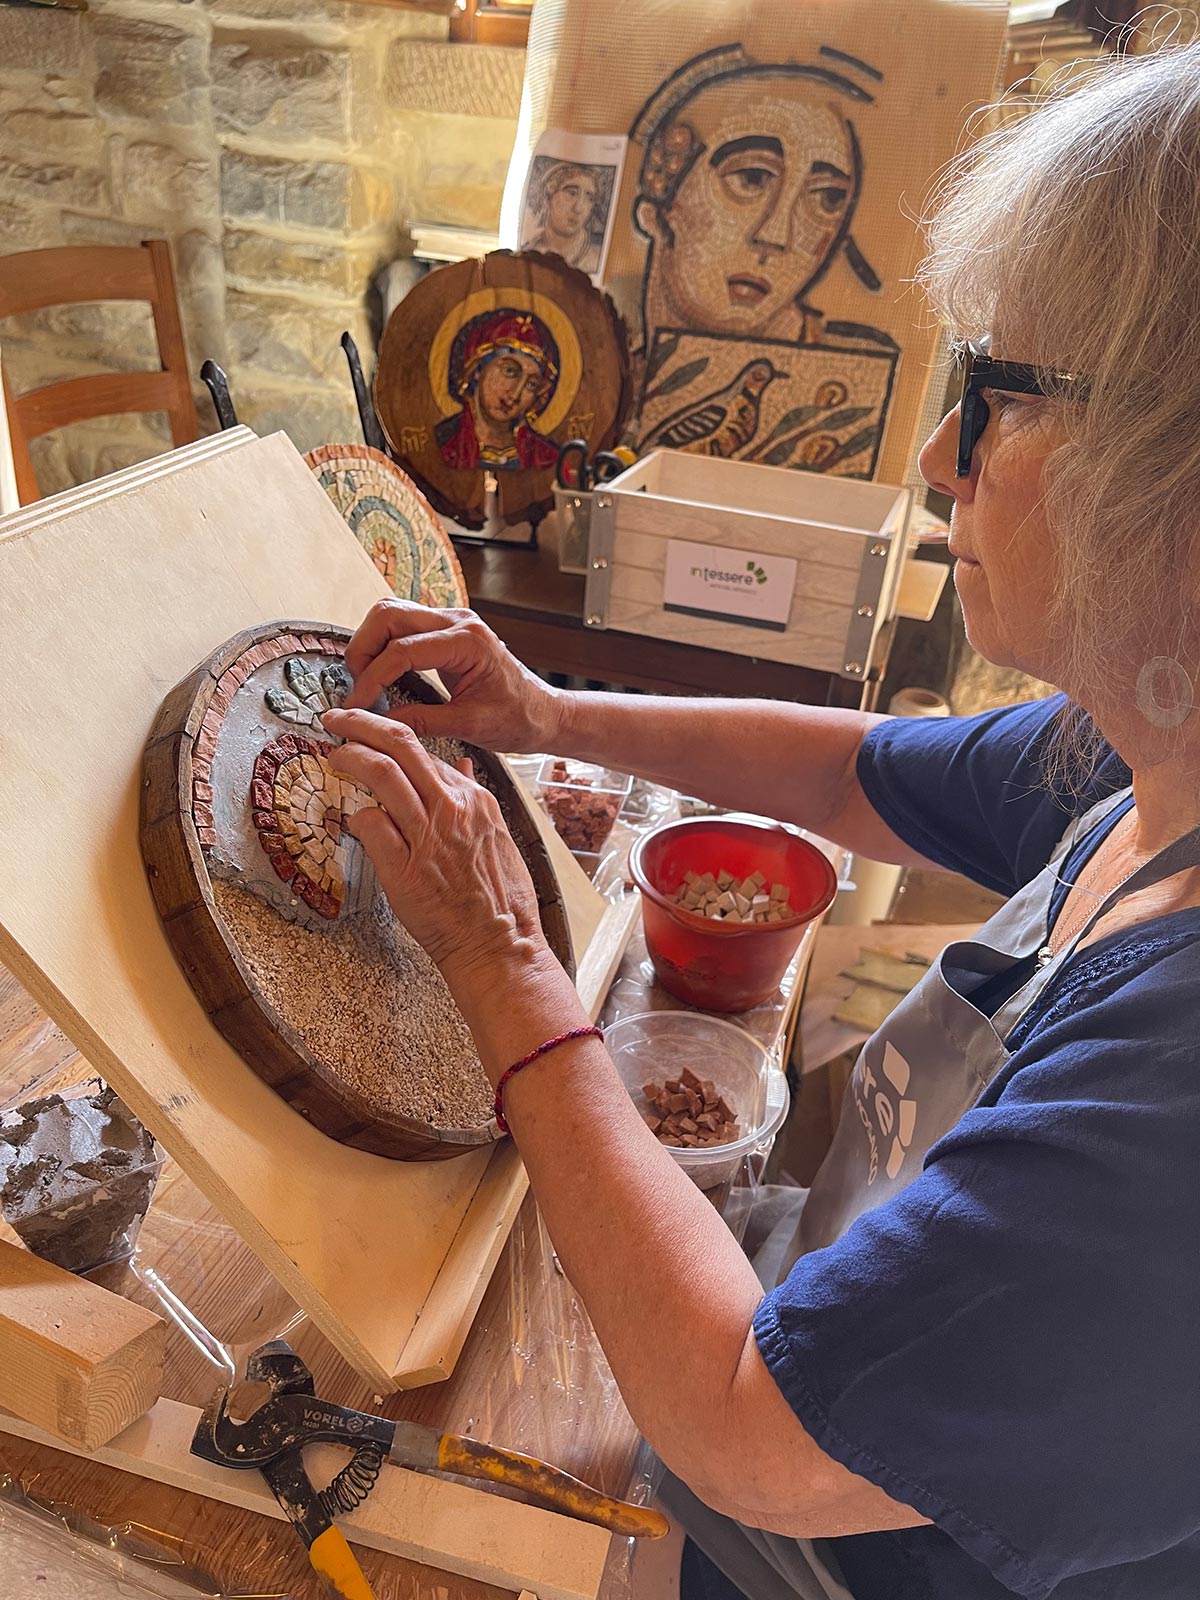 Professional Individual Mosaic Course in Italy (Umbria)